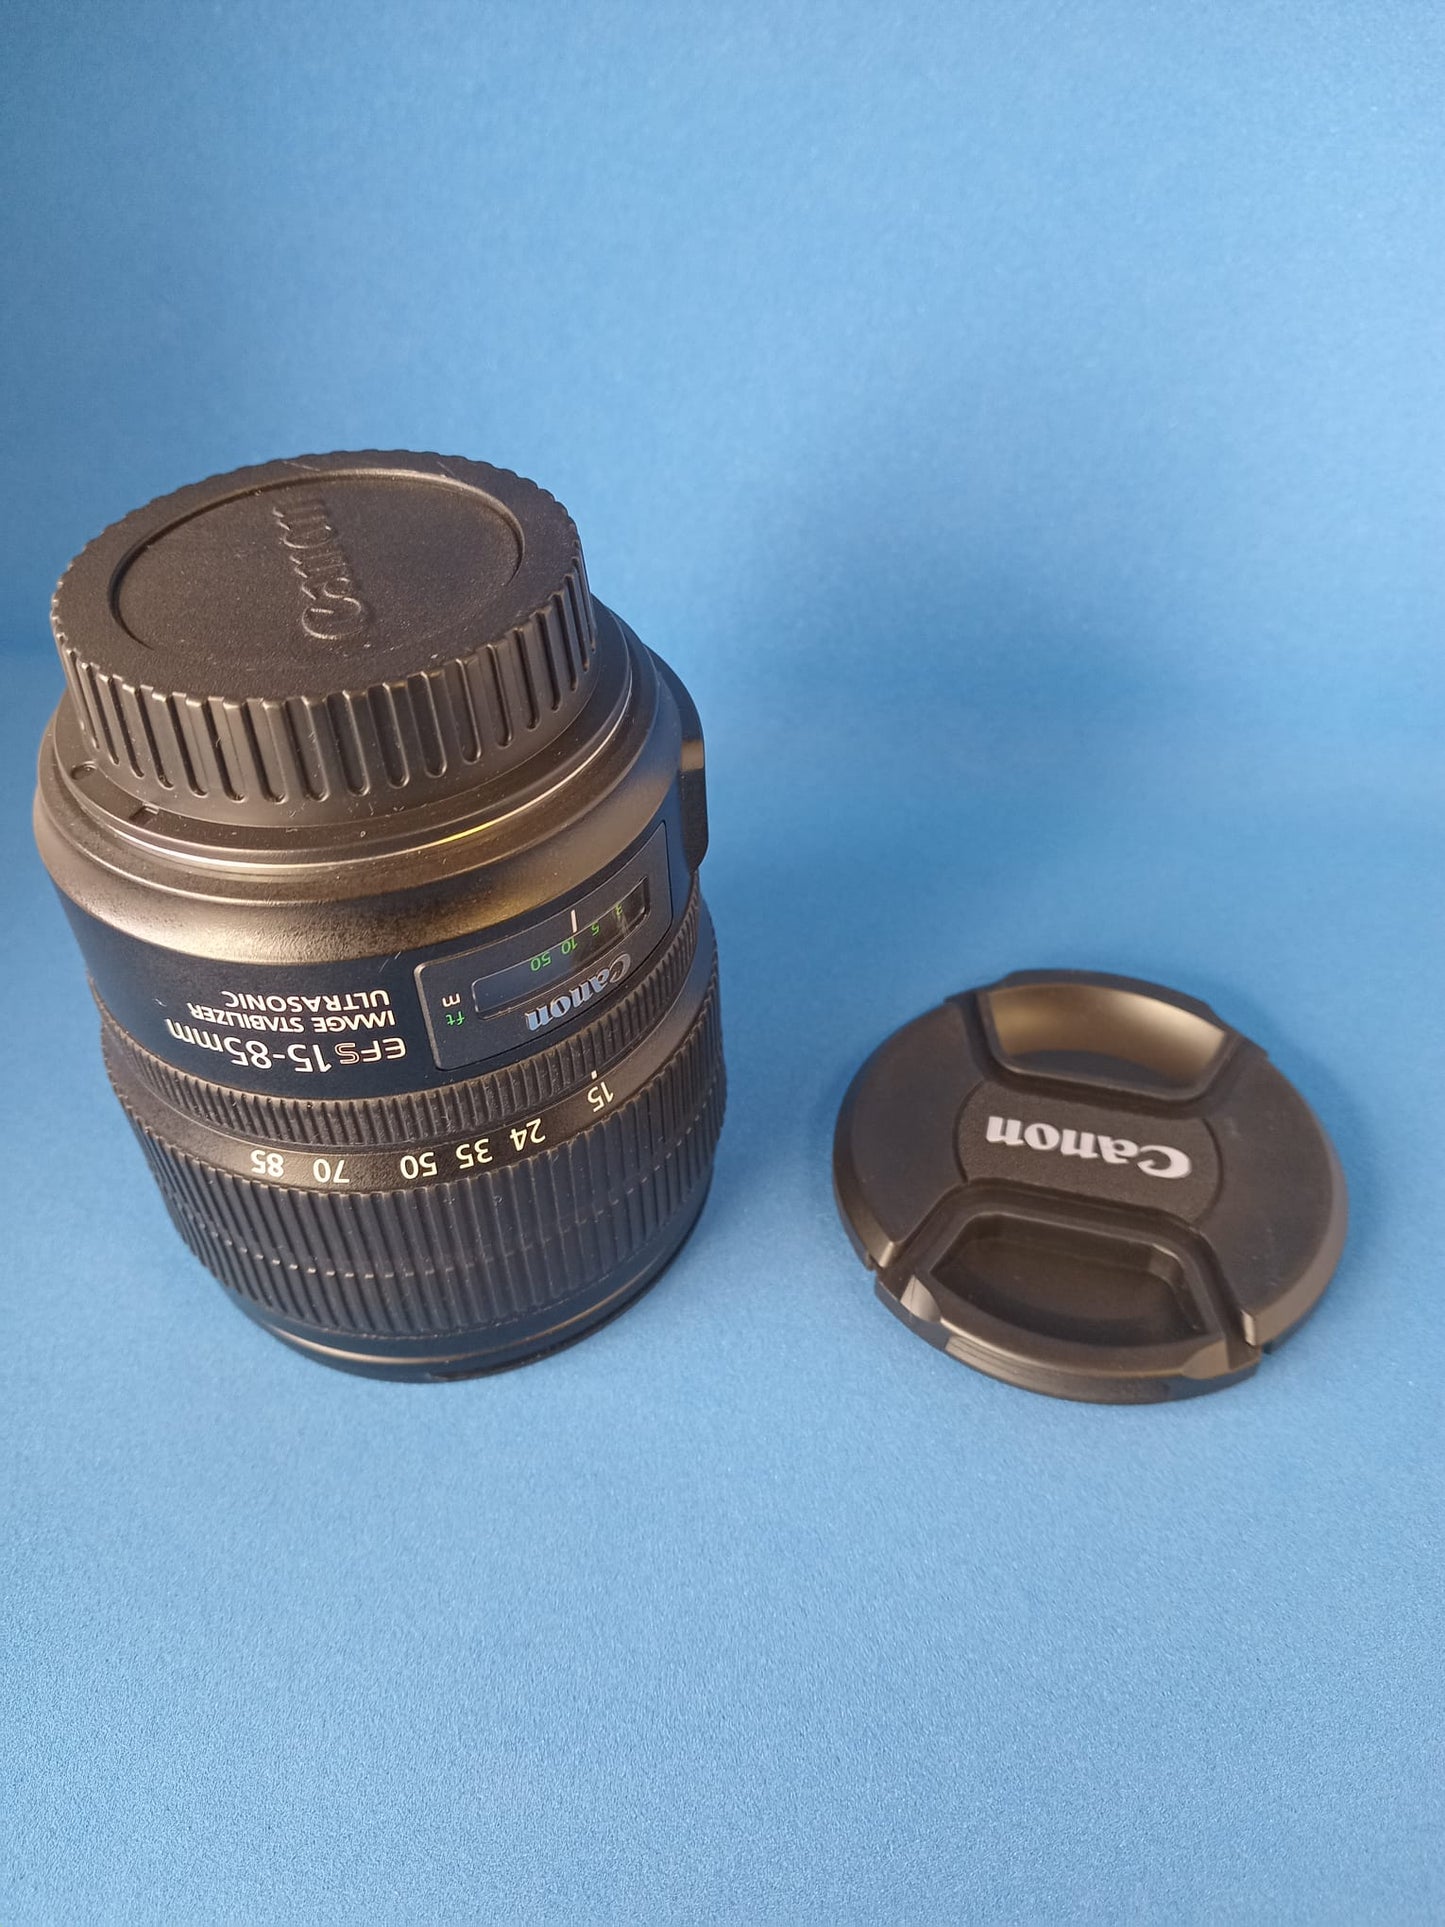 USED Canon EF-S 15-85mm